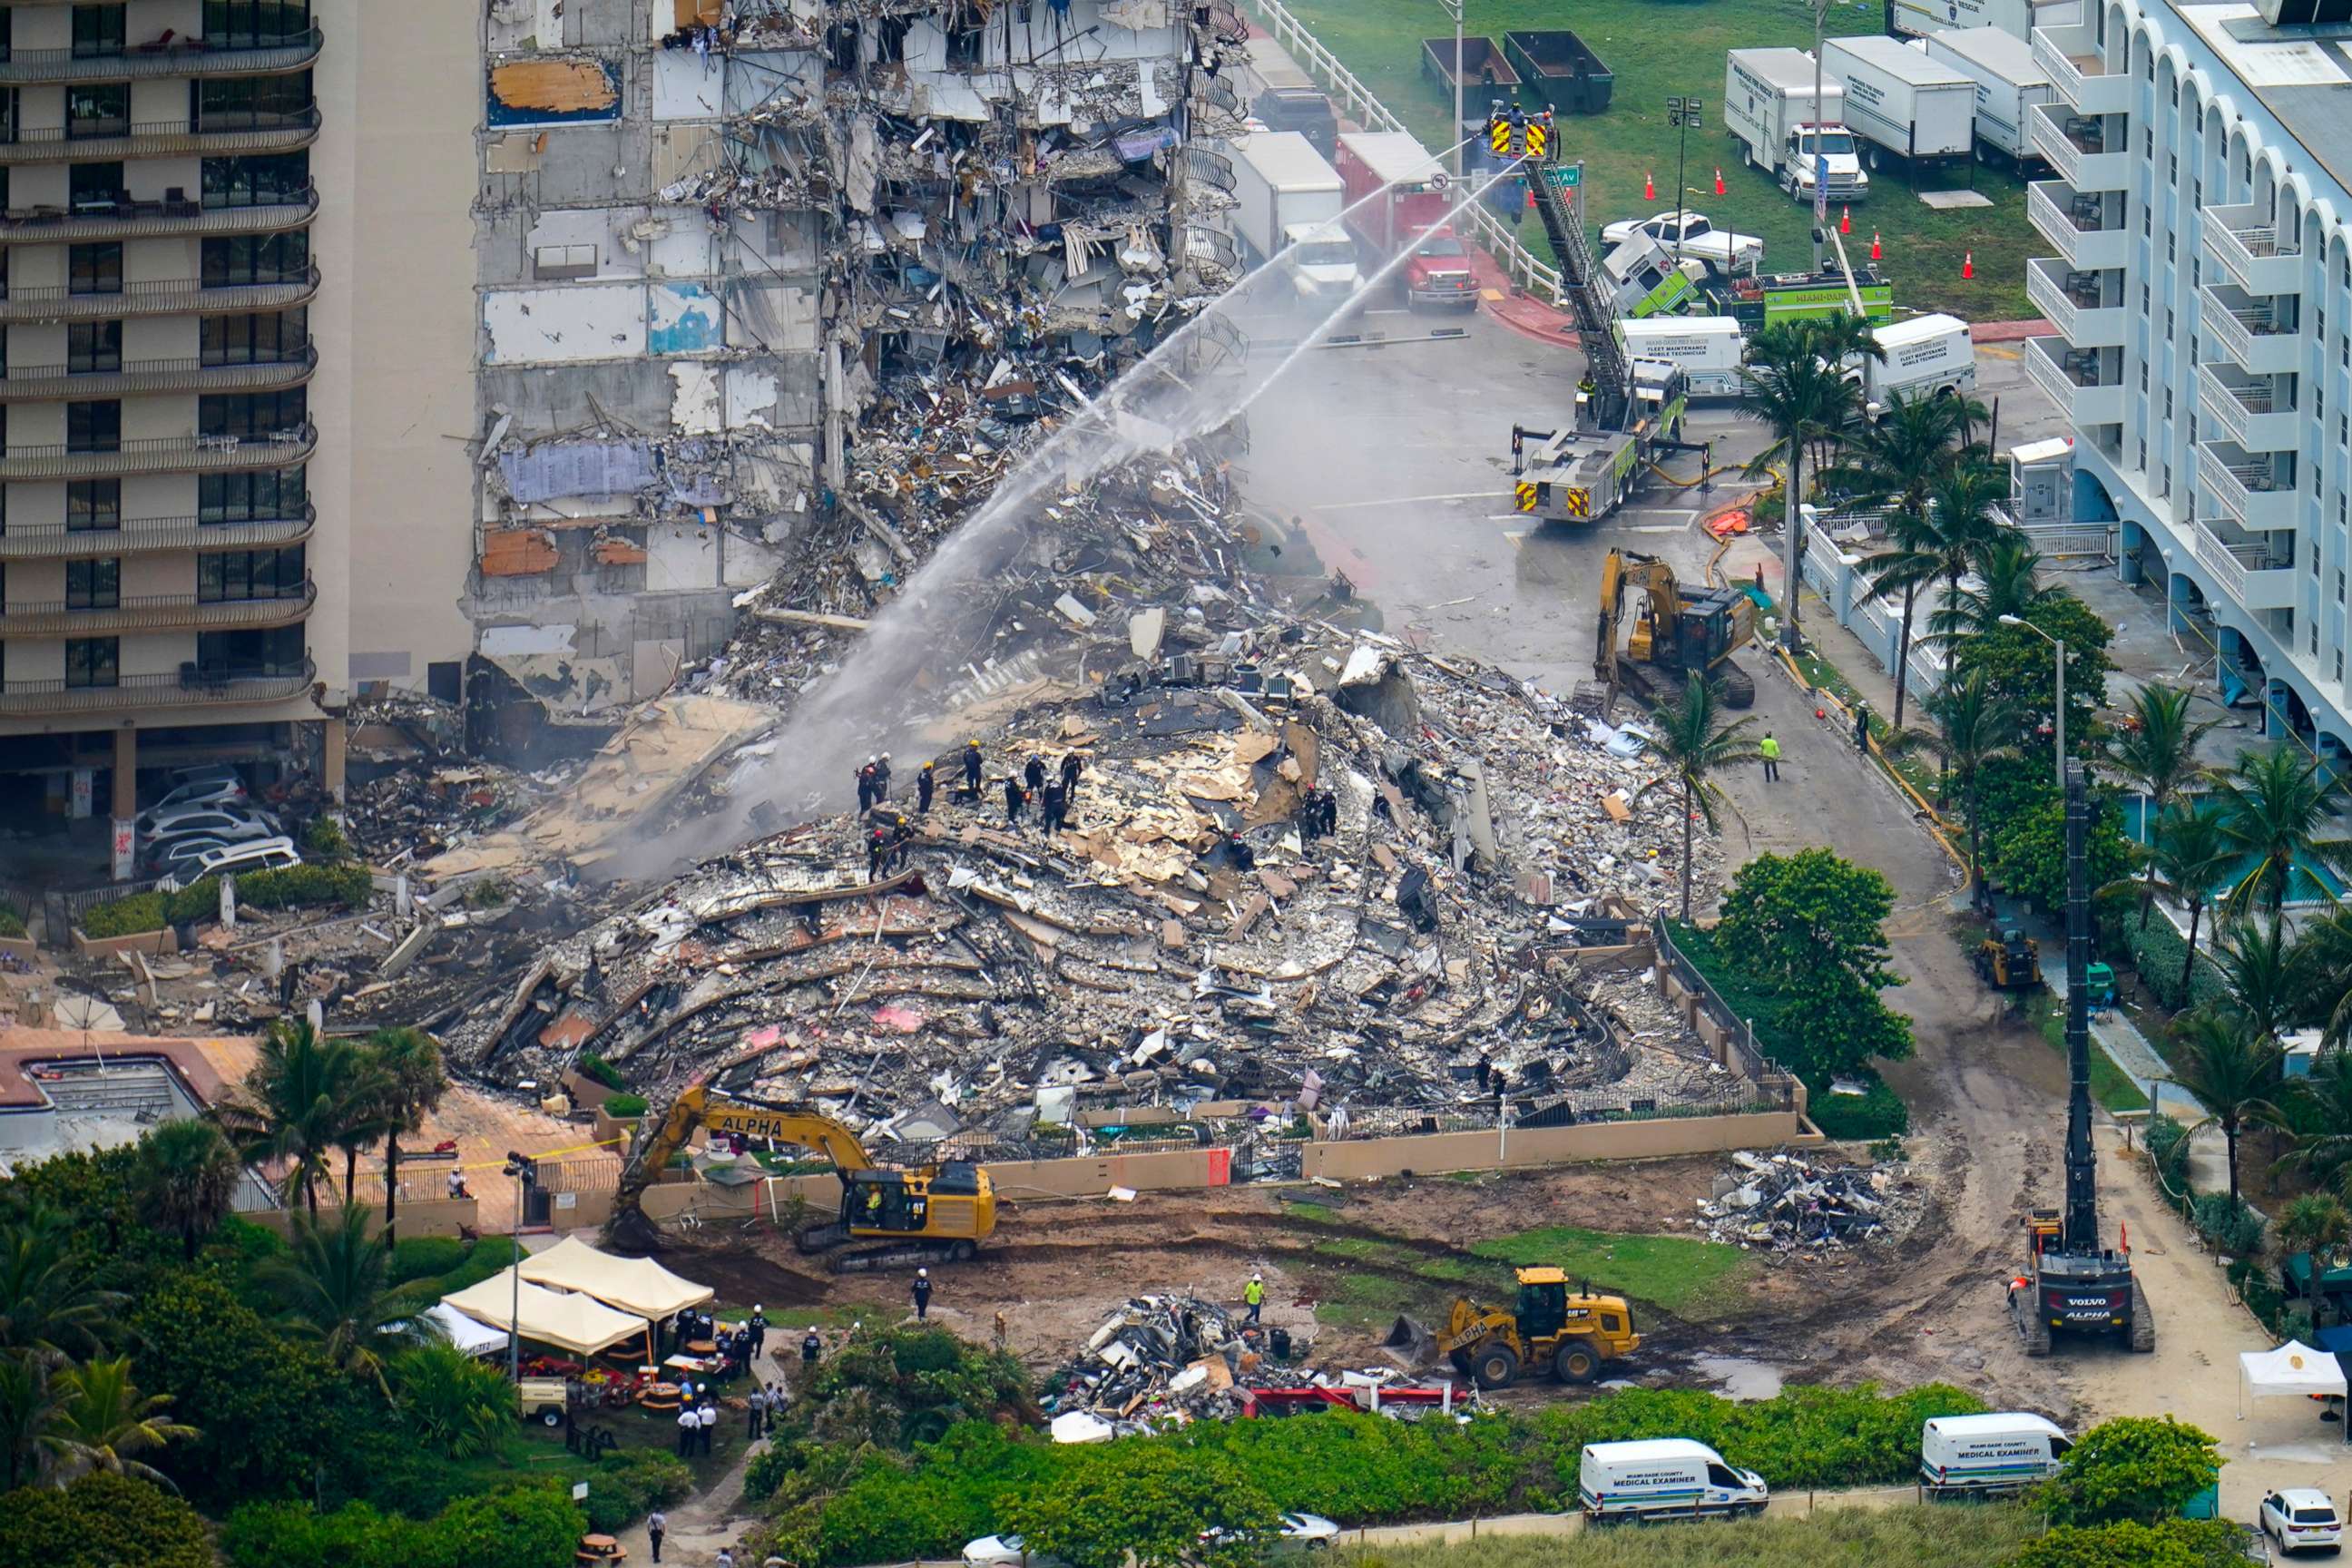 PHOTO: Rescue workers search the rubble at the Champlain Towers South Condo, June 25, 2021, in the Surfside area of Miami.